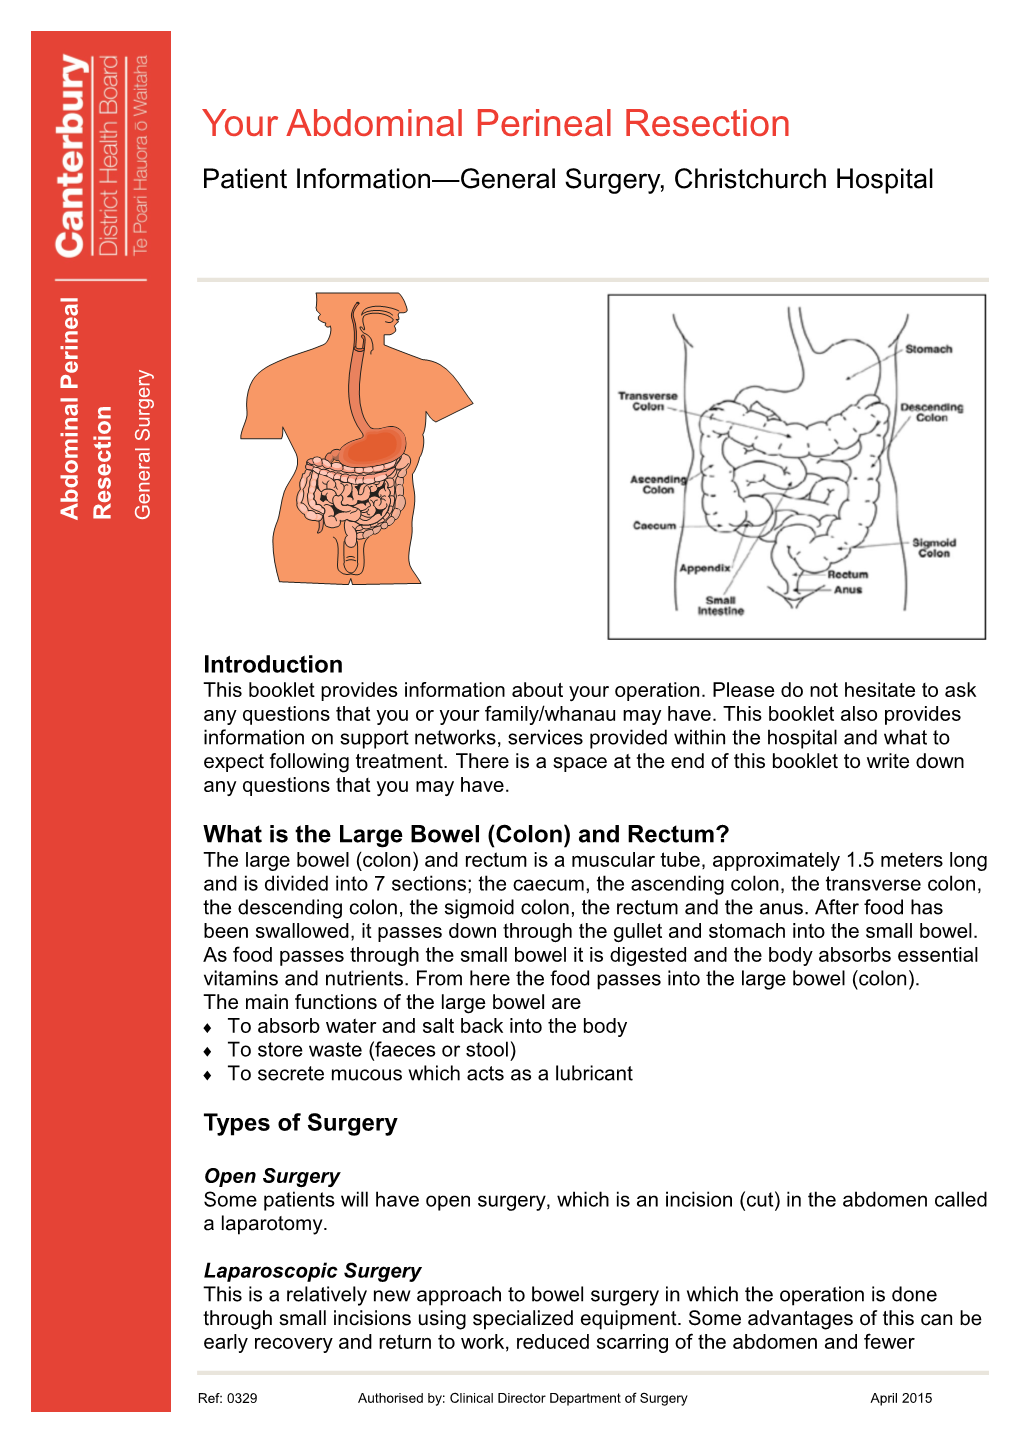 Your Abdominal Perineal Resection Surgery Book